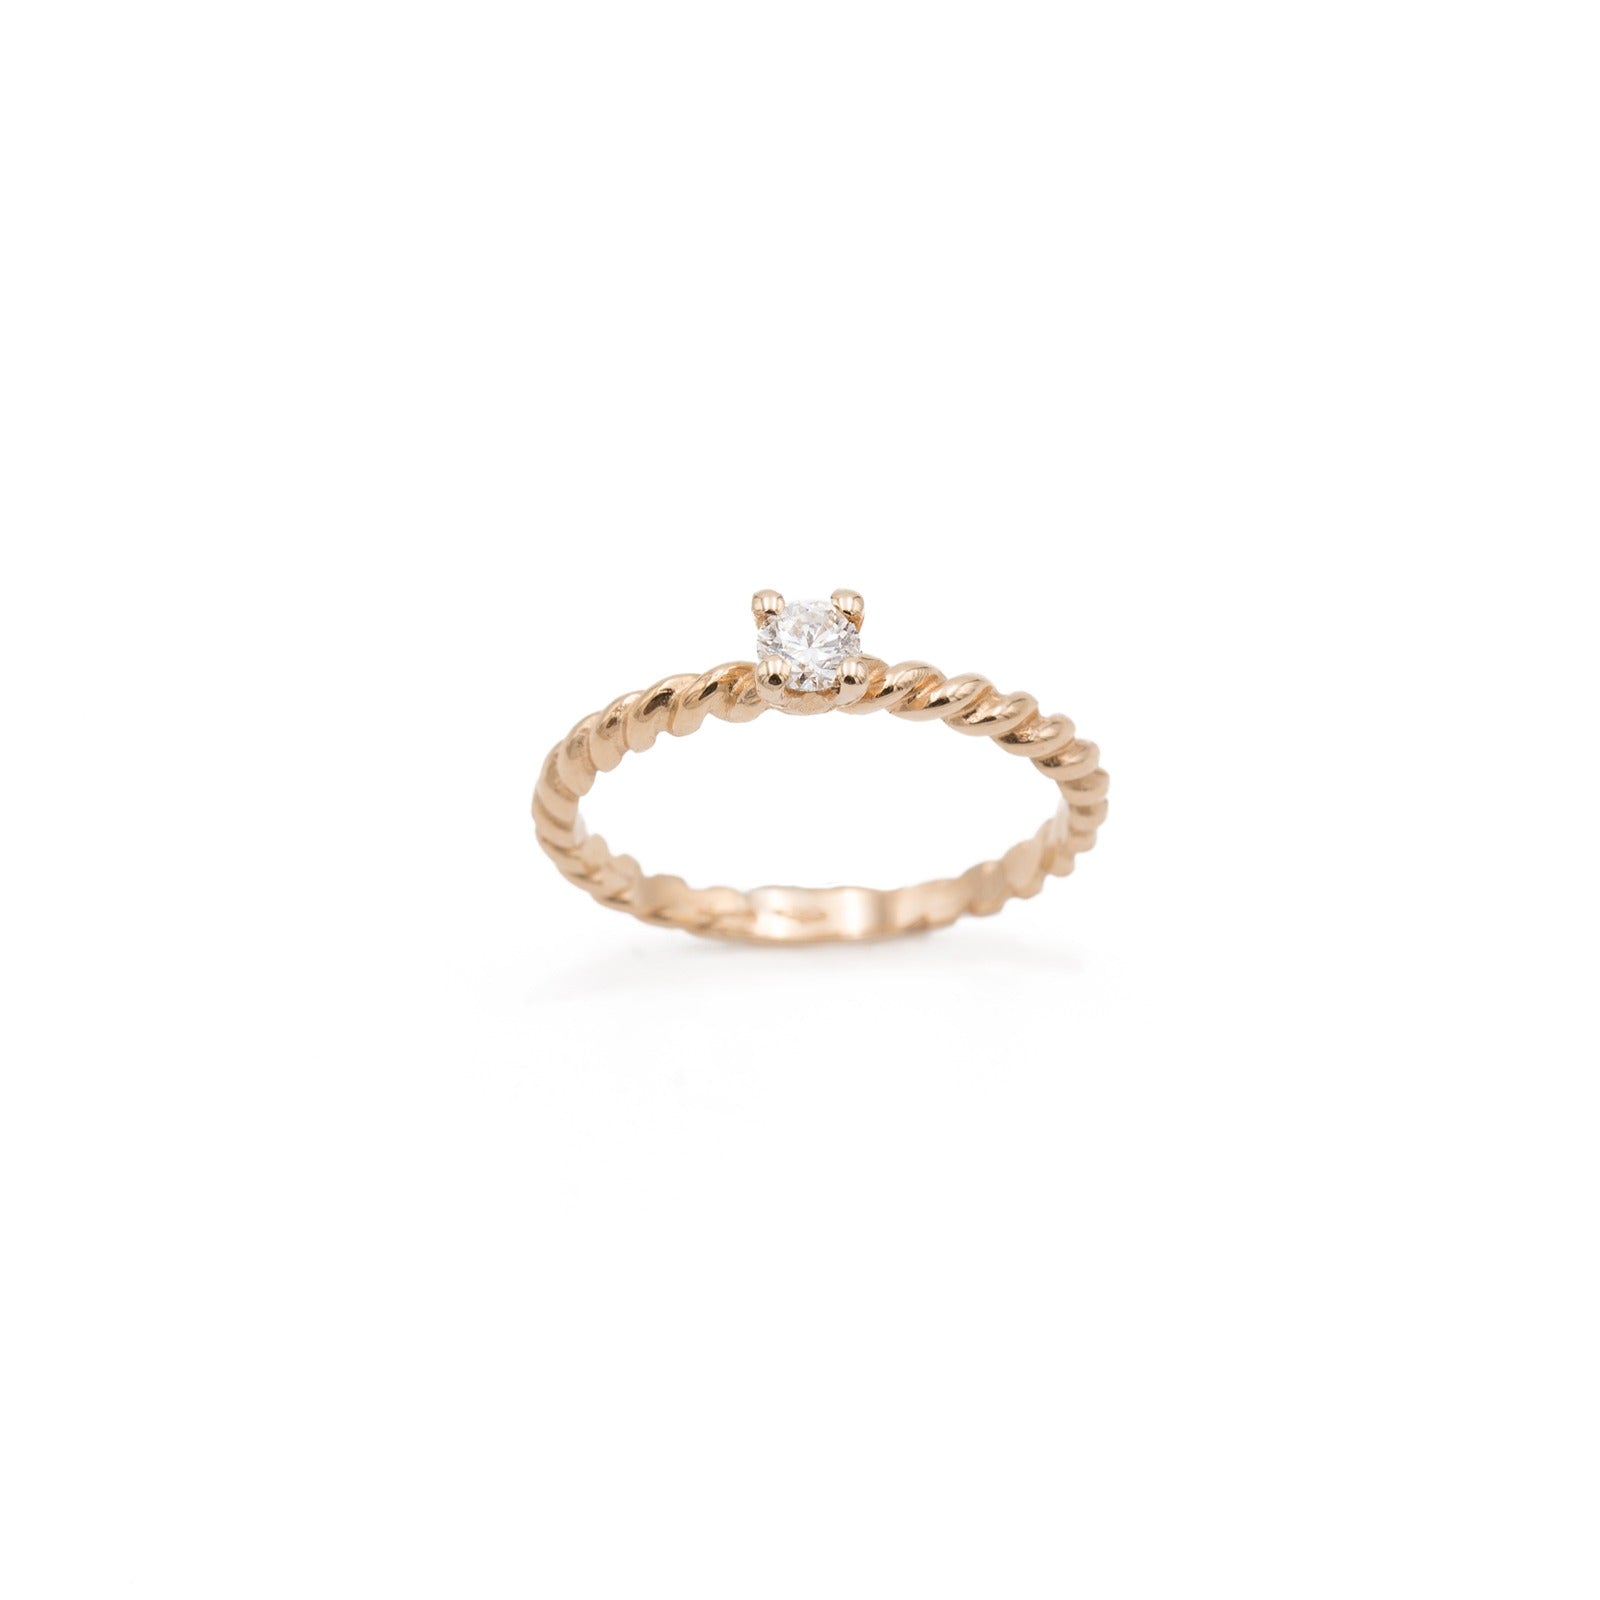 Rose gold braided ring with central diamond